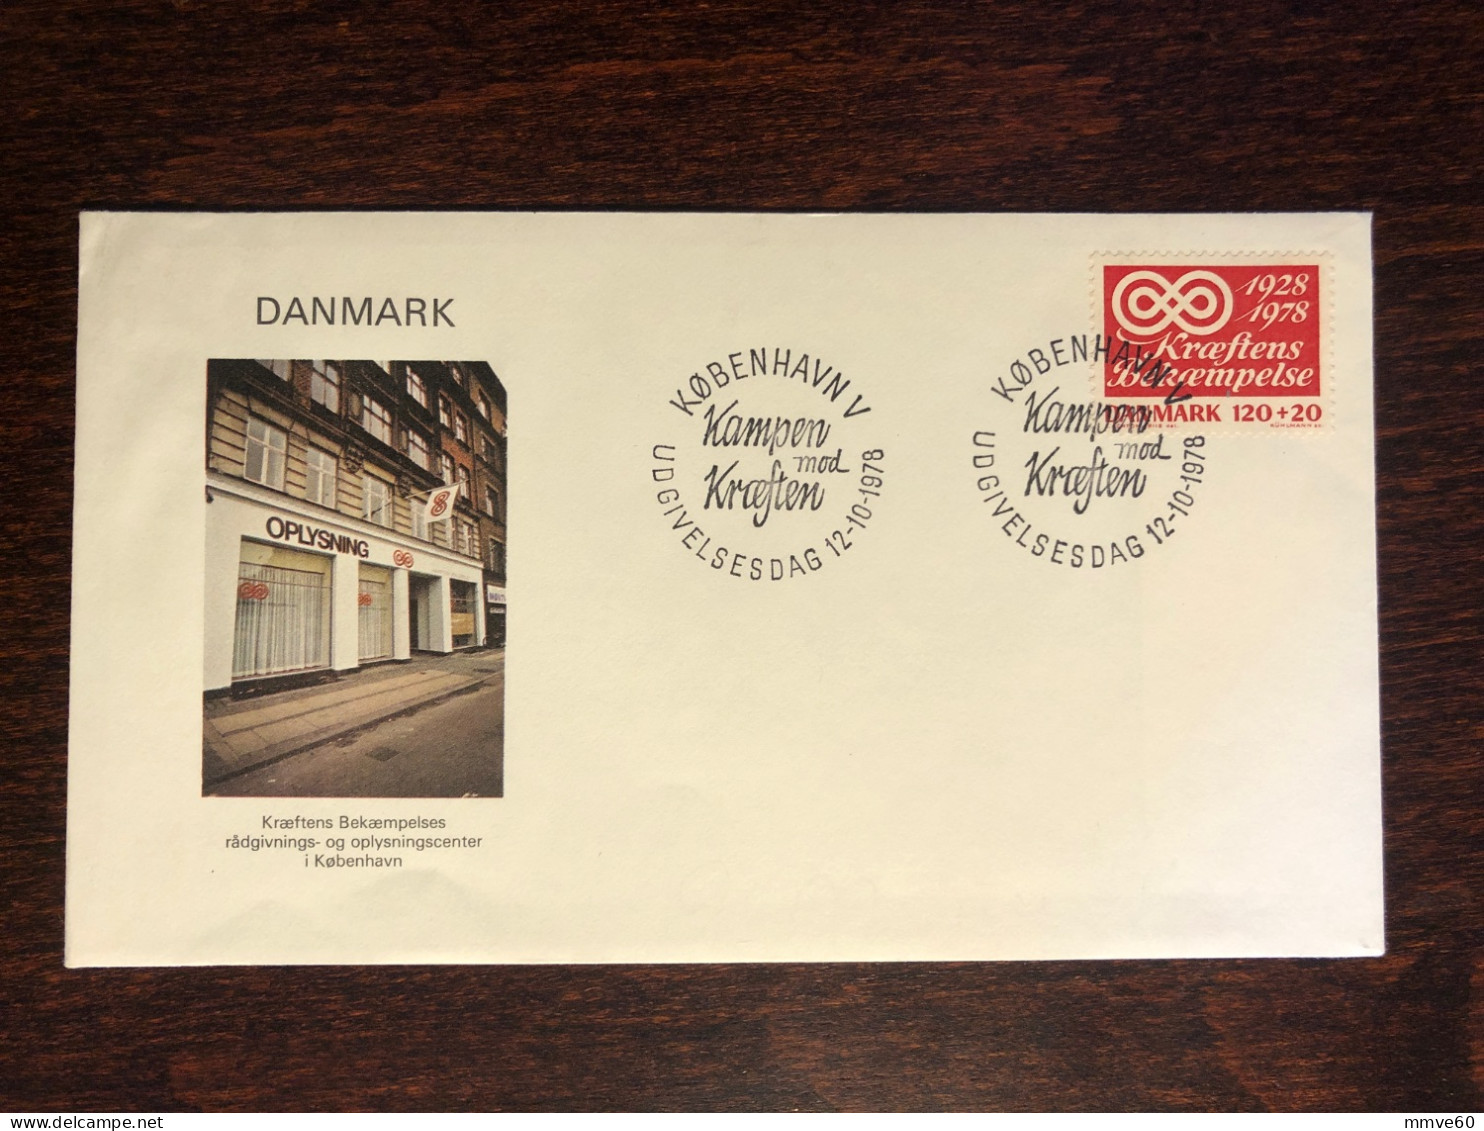 DENMARK FDC COVER 1978 YEAR CANCER ONCOLOGY HEALTH MEDICINE STAMPS - FDC